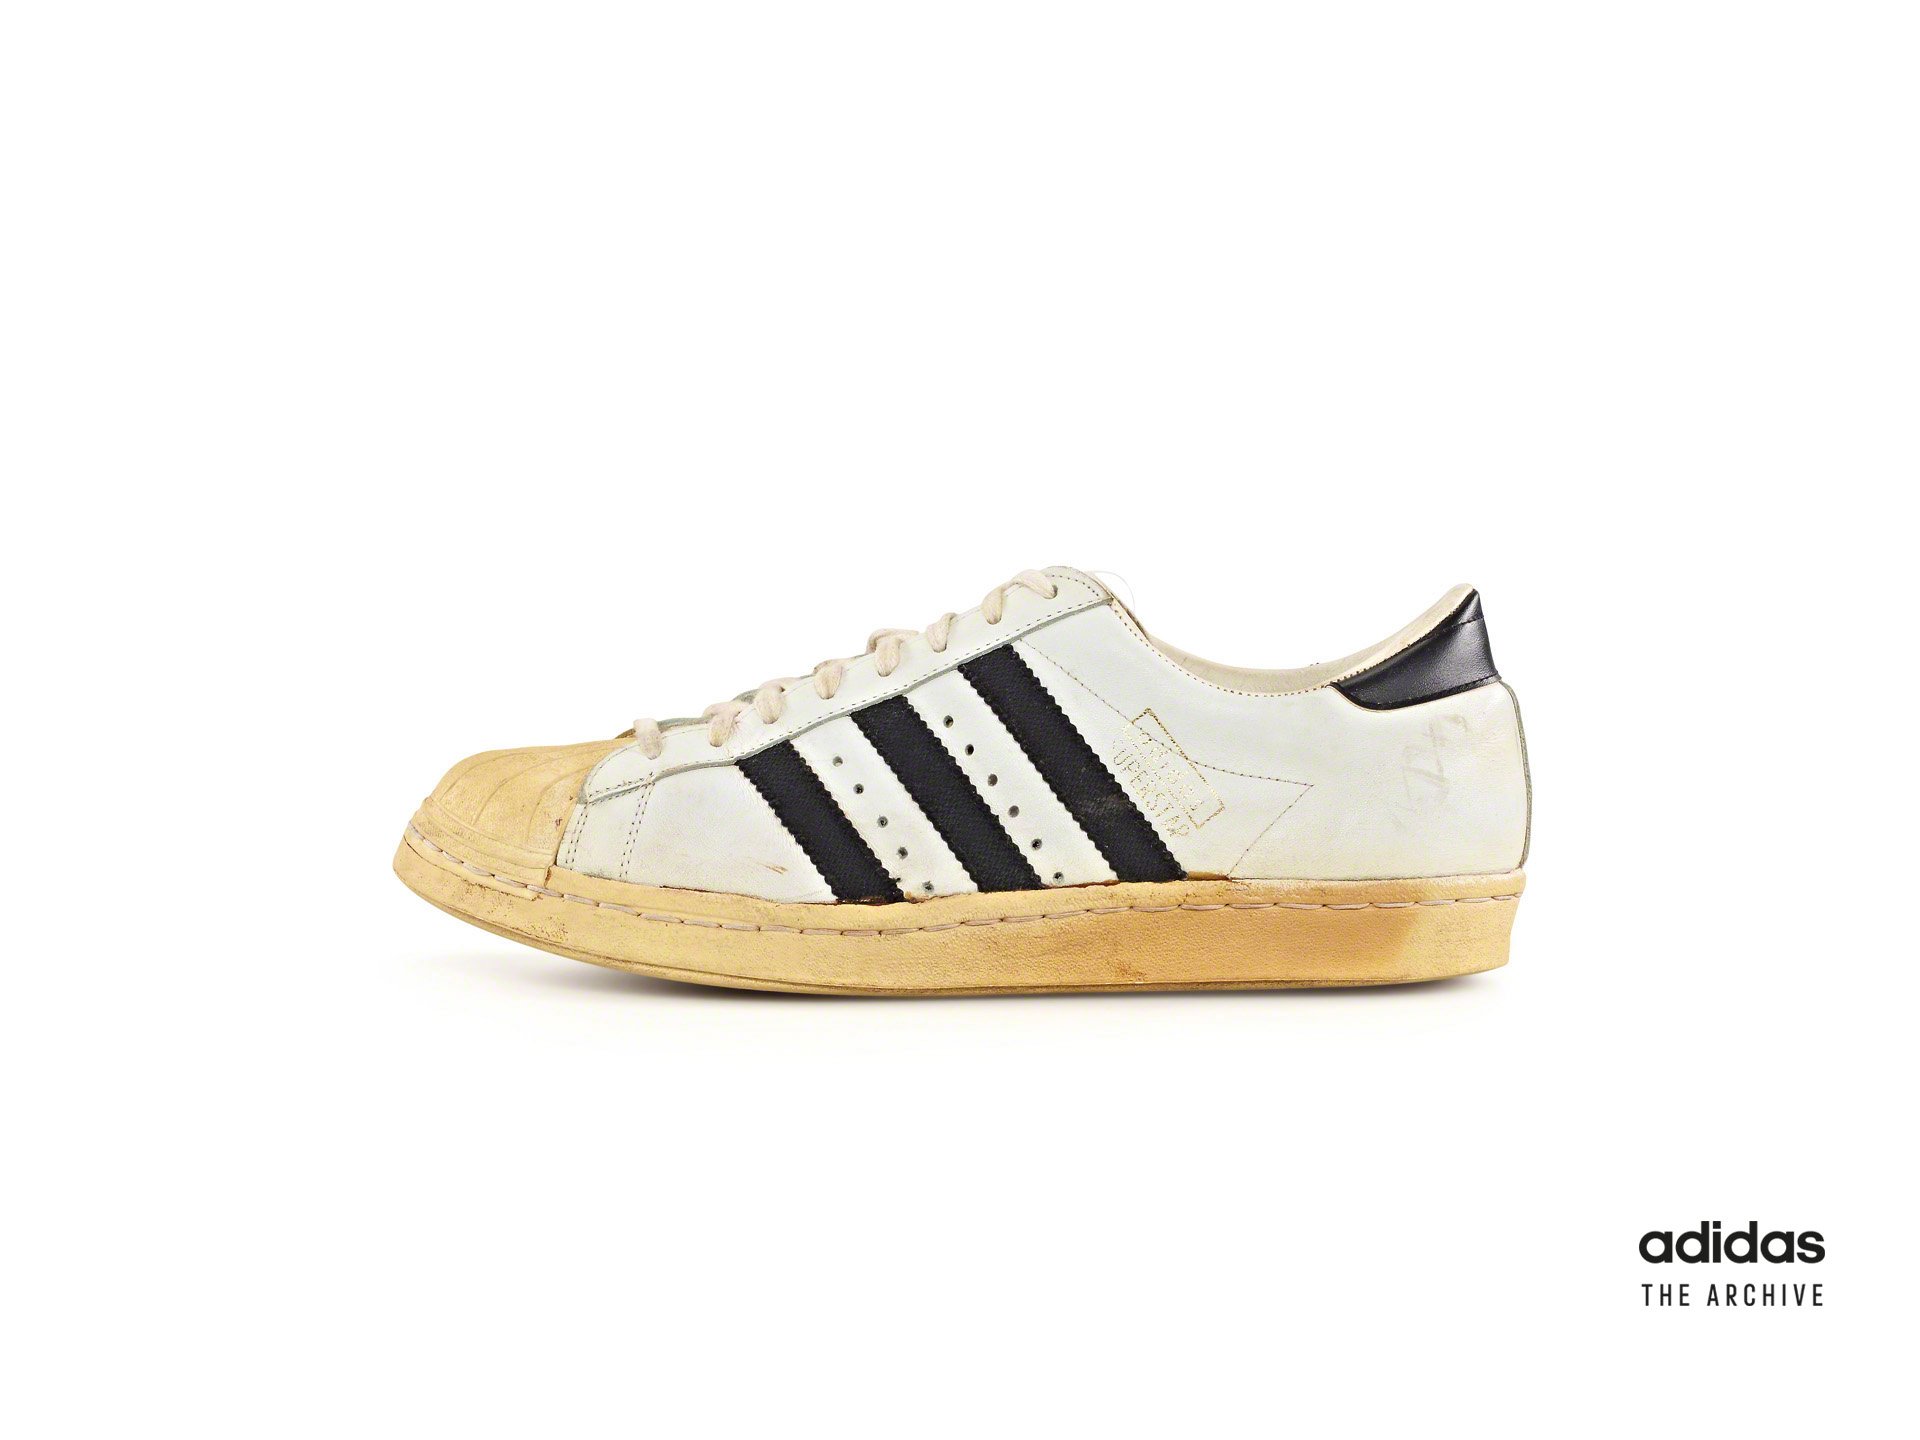 Medicinal Solve Shopkeeper adidas on Twitter: "1970, Superstar​ ​ The '70s brought iconic music,  culture, fashion &amp; prominent moments in sport history. It also brought  the first edition of the timeless adidas Superstar, which went